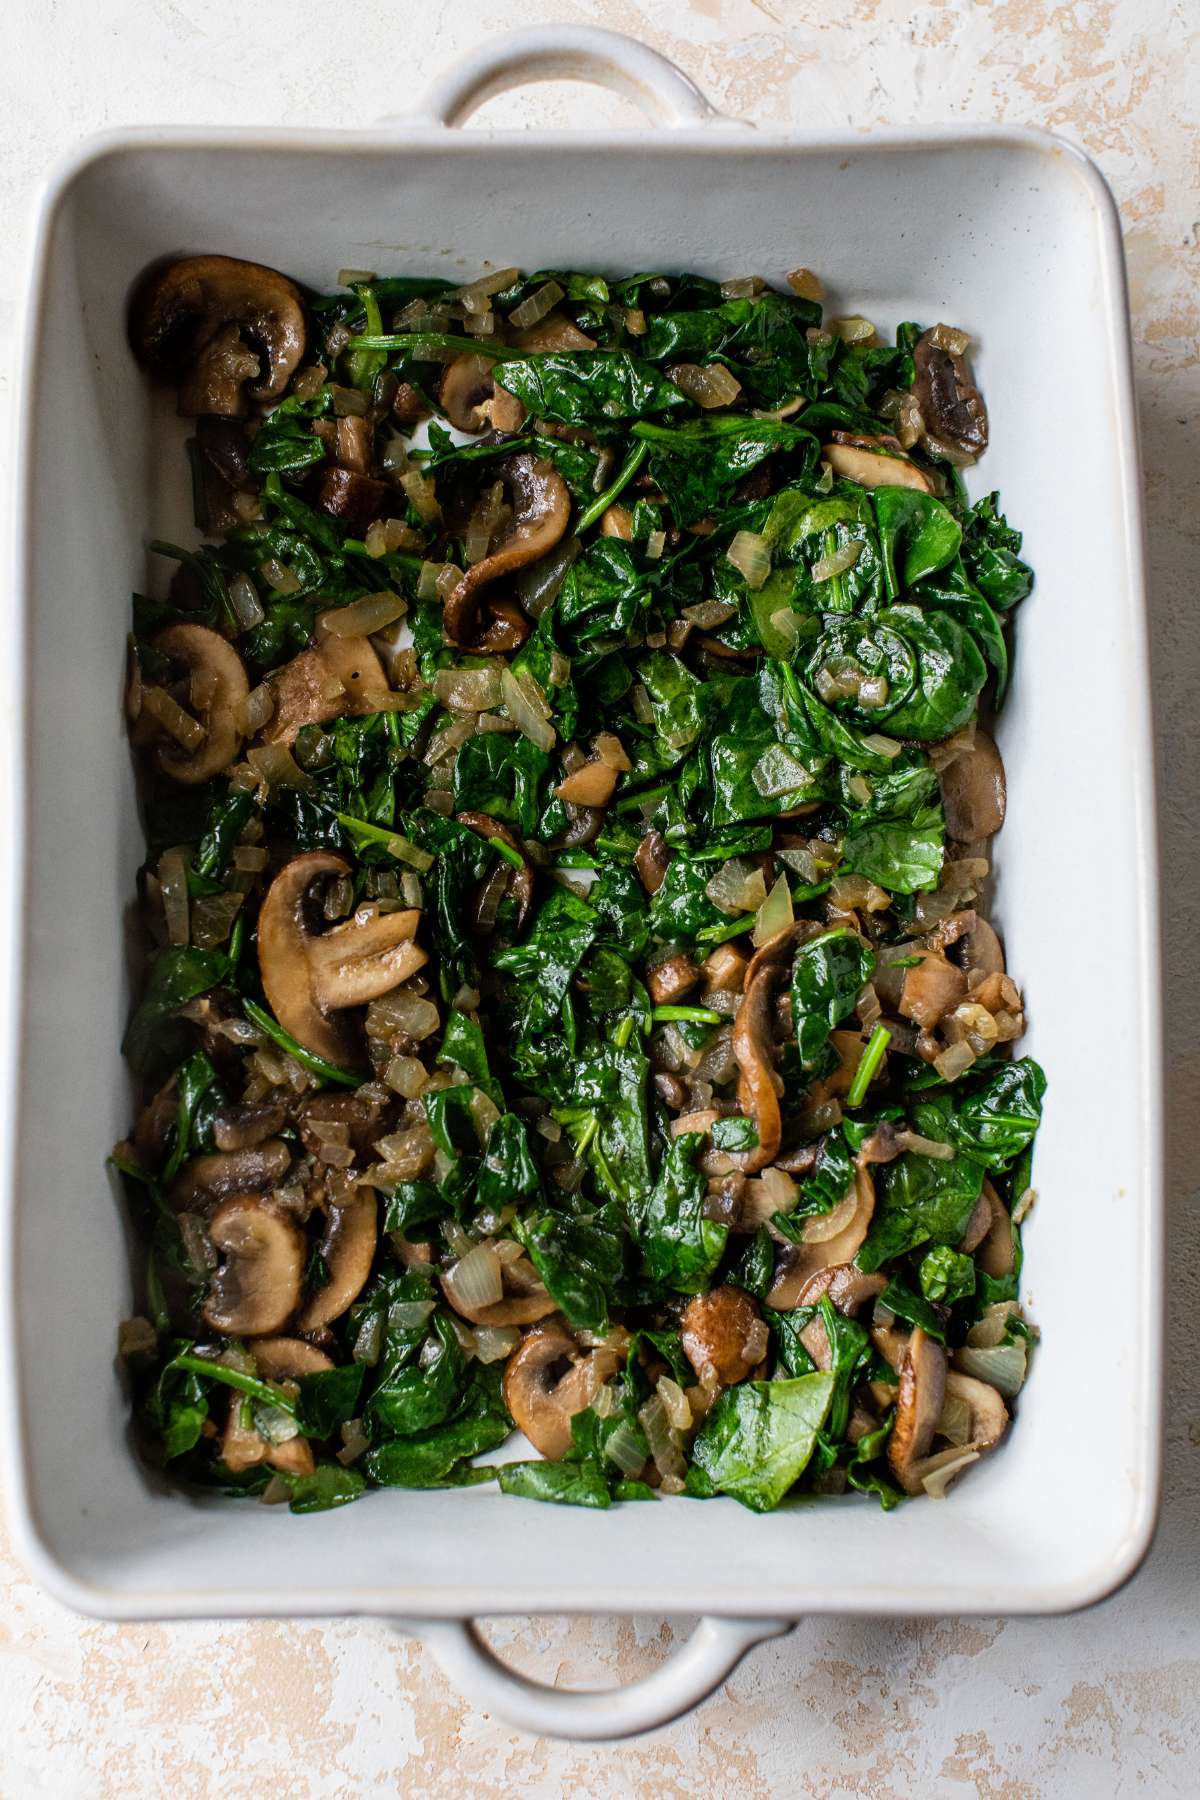 Spinach and mushrooms in the bottom of a casserole dish.